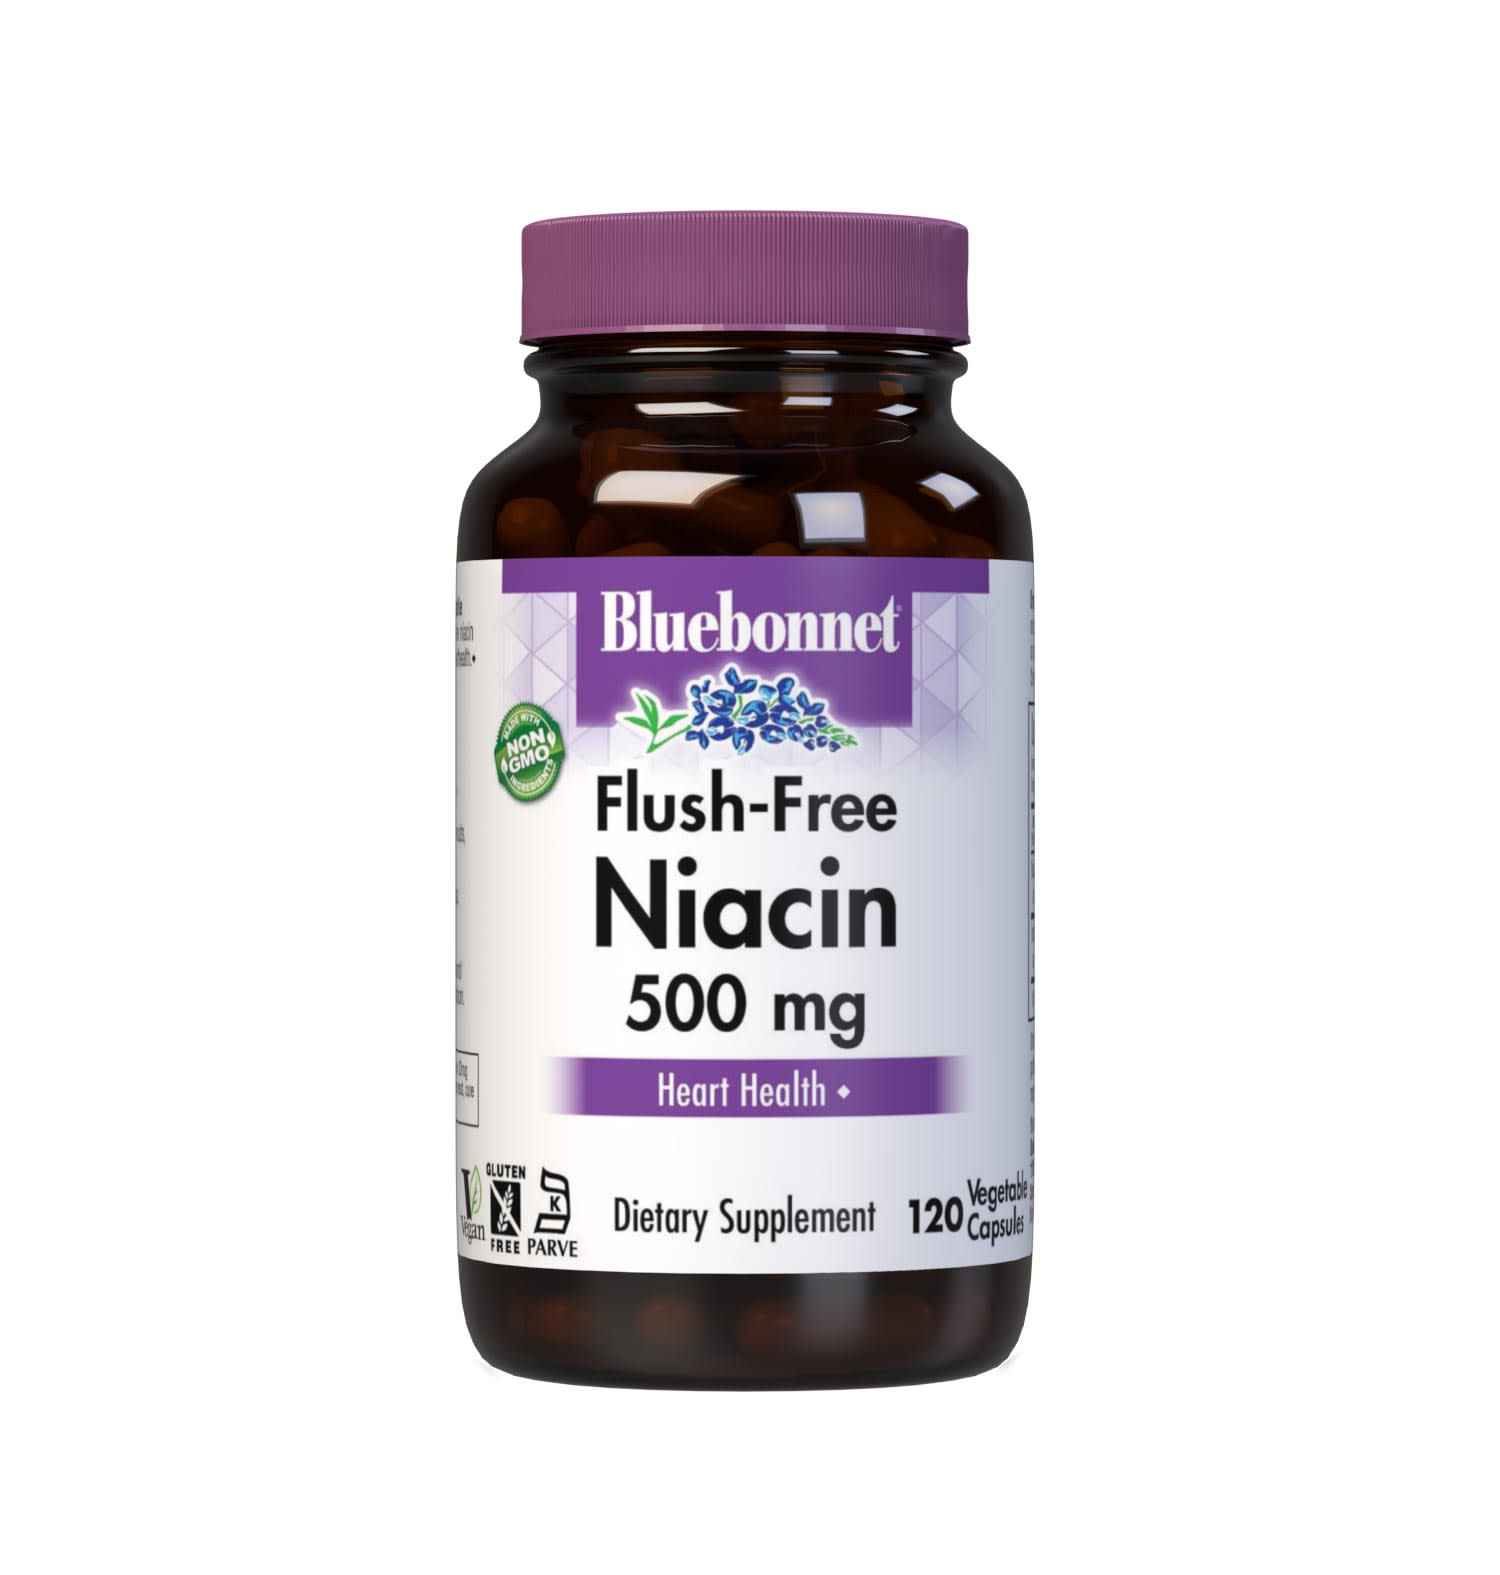 Bluebonnet’s Flush-Free Niacin 500 mg Vegetable Capsules are formulated with crystalline flush-free niacin from inositol hexanicotinate to help support cardiovascular health. #size_120 count